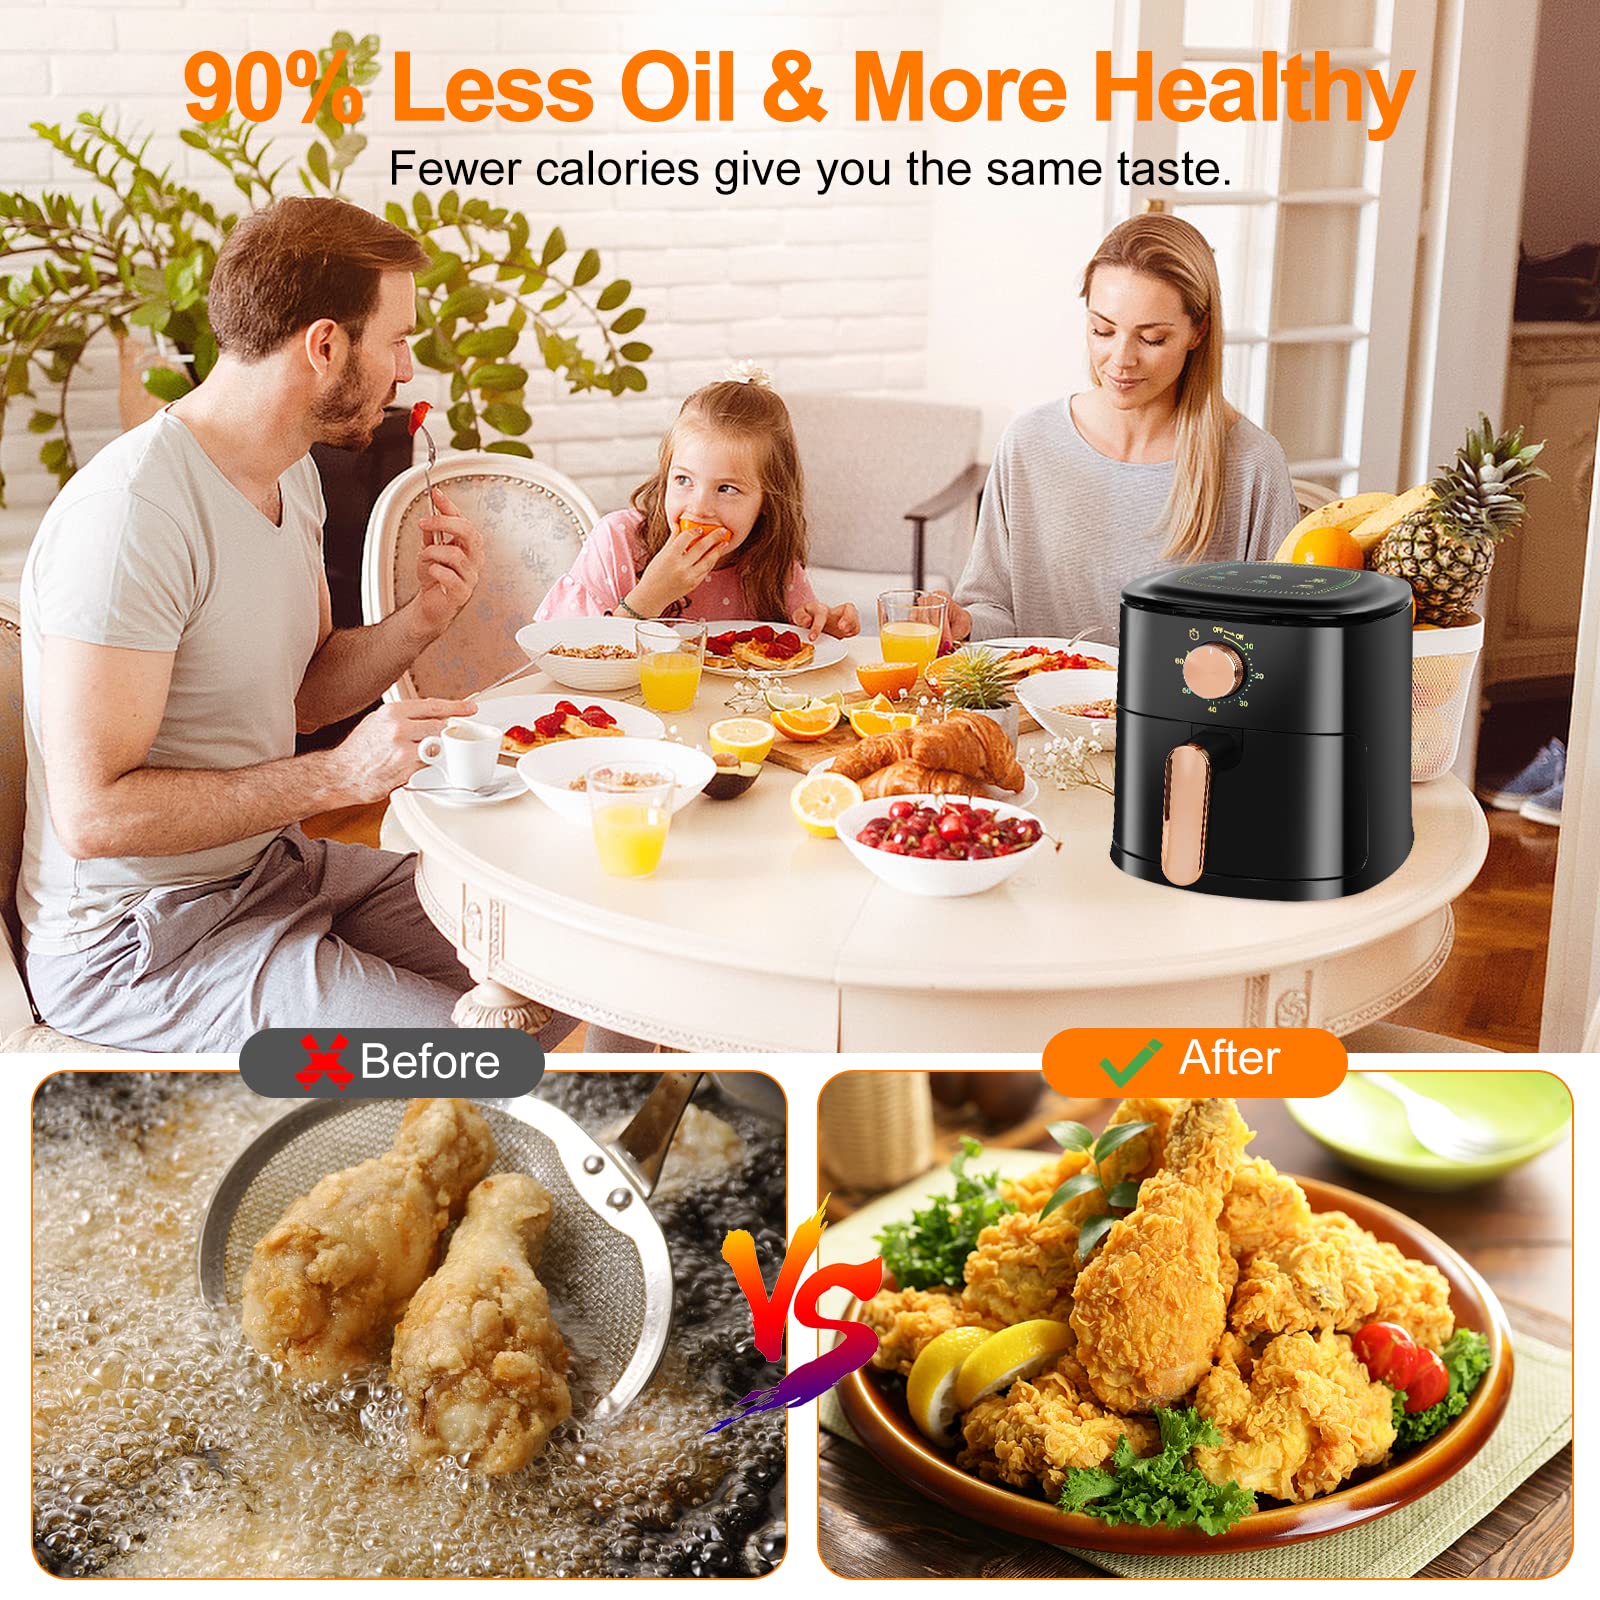 BXE Air Fryer Healthy Oil-Free Cooking Non-Stick Easy To Clean Quiet Operation With Temperature And Time Control 80% Less Oil Ideal For Quick And Easy Meals Black